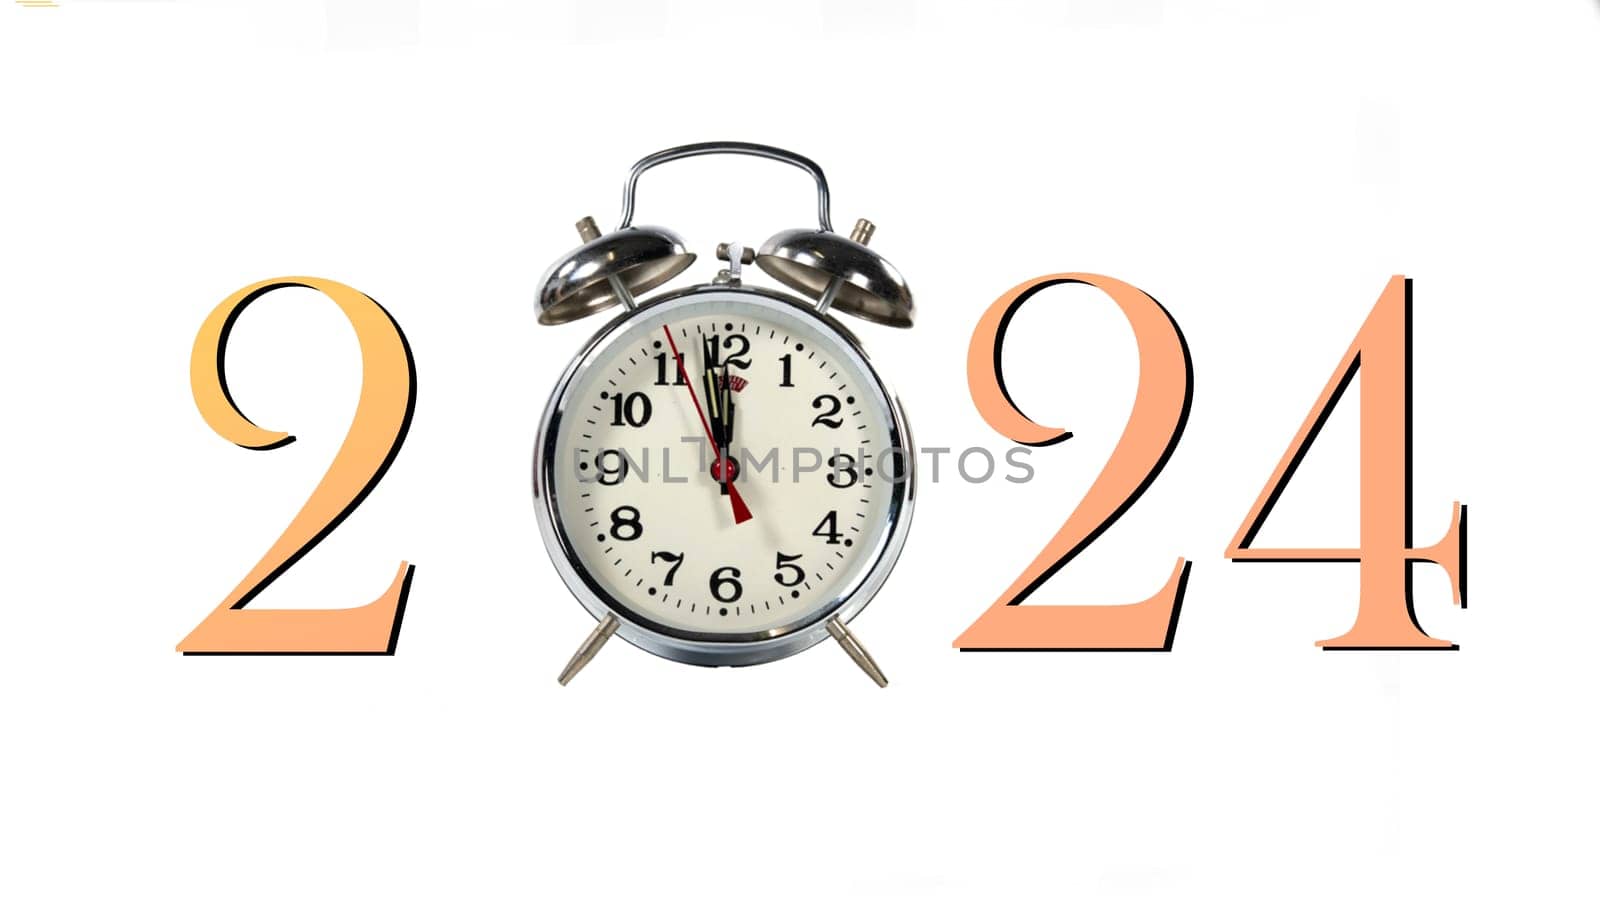 almost twelfe o clock and a new year two thousand twenty-four by compuinfoto